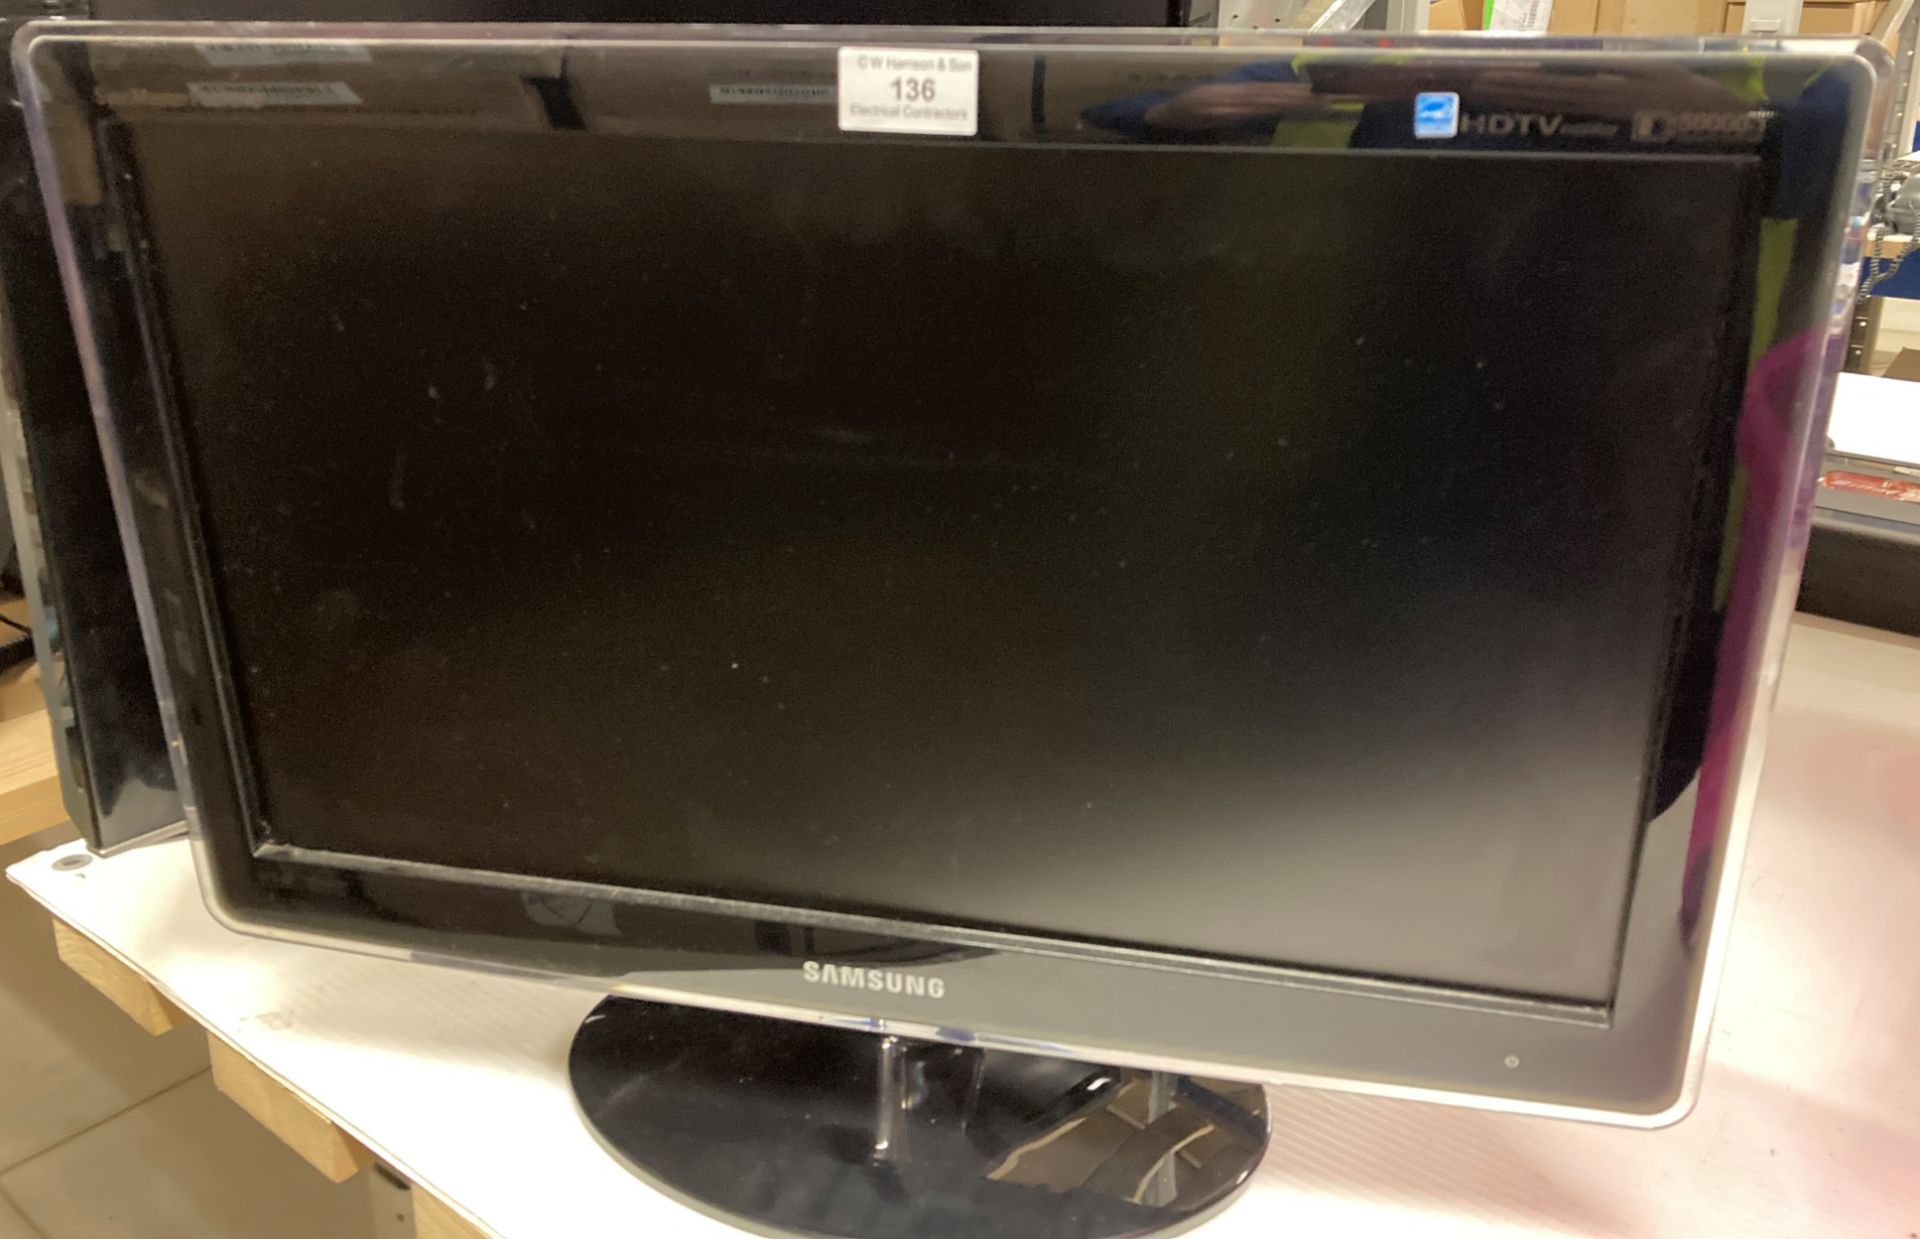 Samsung 22 inch HD TV complete with power lead - no remote (no test) (Saleroom location: D05)